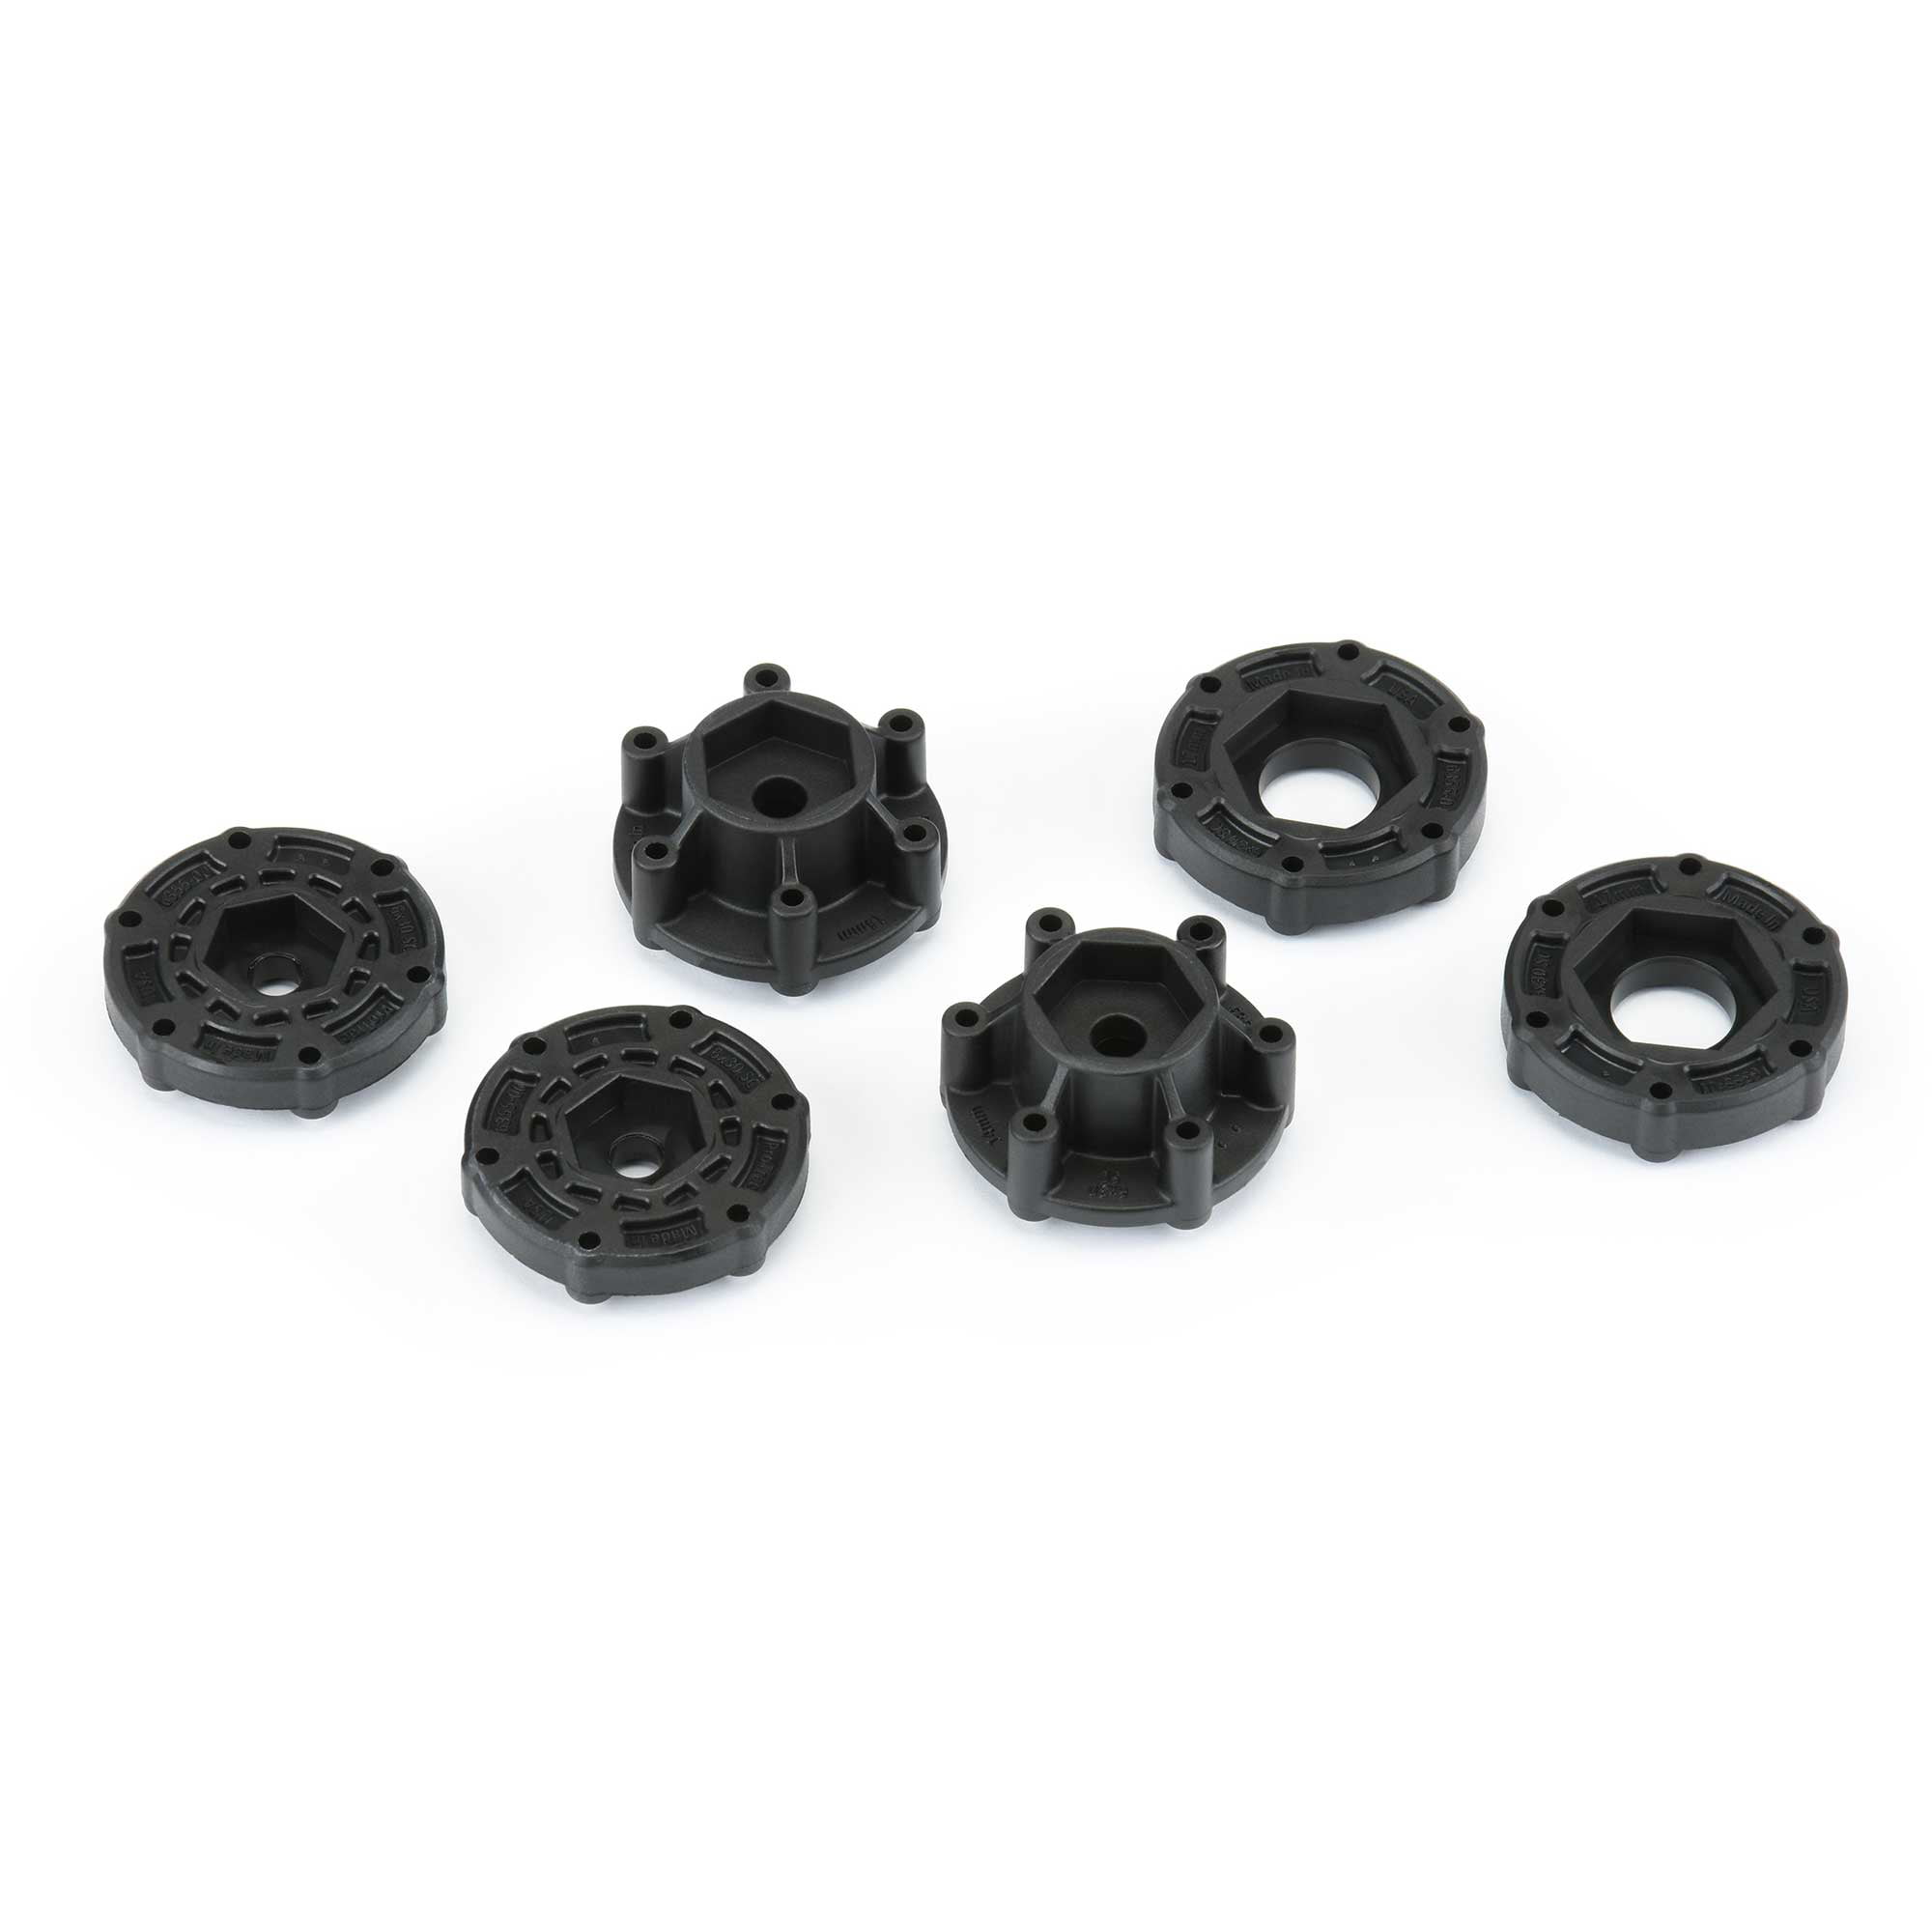 PRO6354-00 Pro-Line 6x30 to 12mm SC Hex Adapters 4